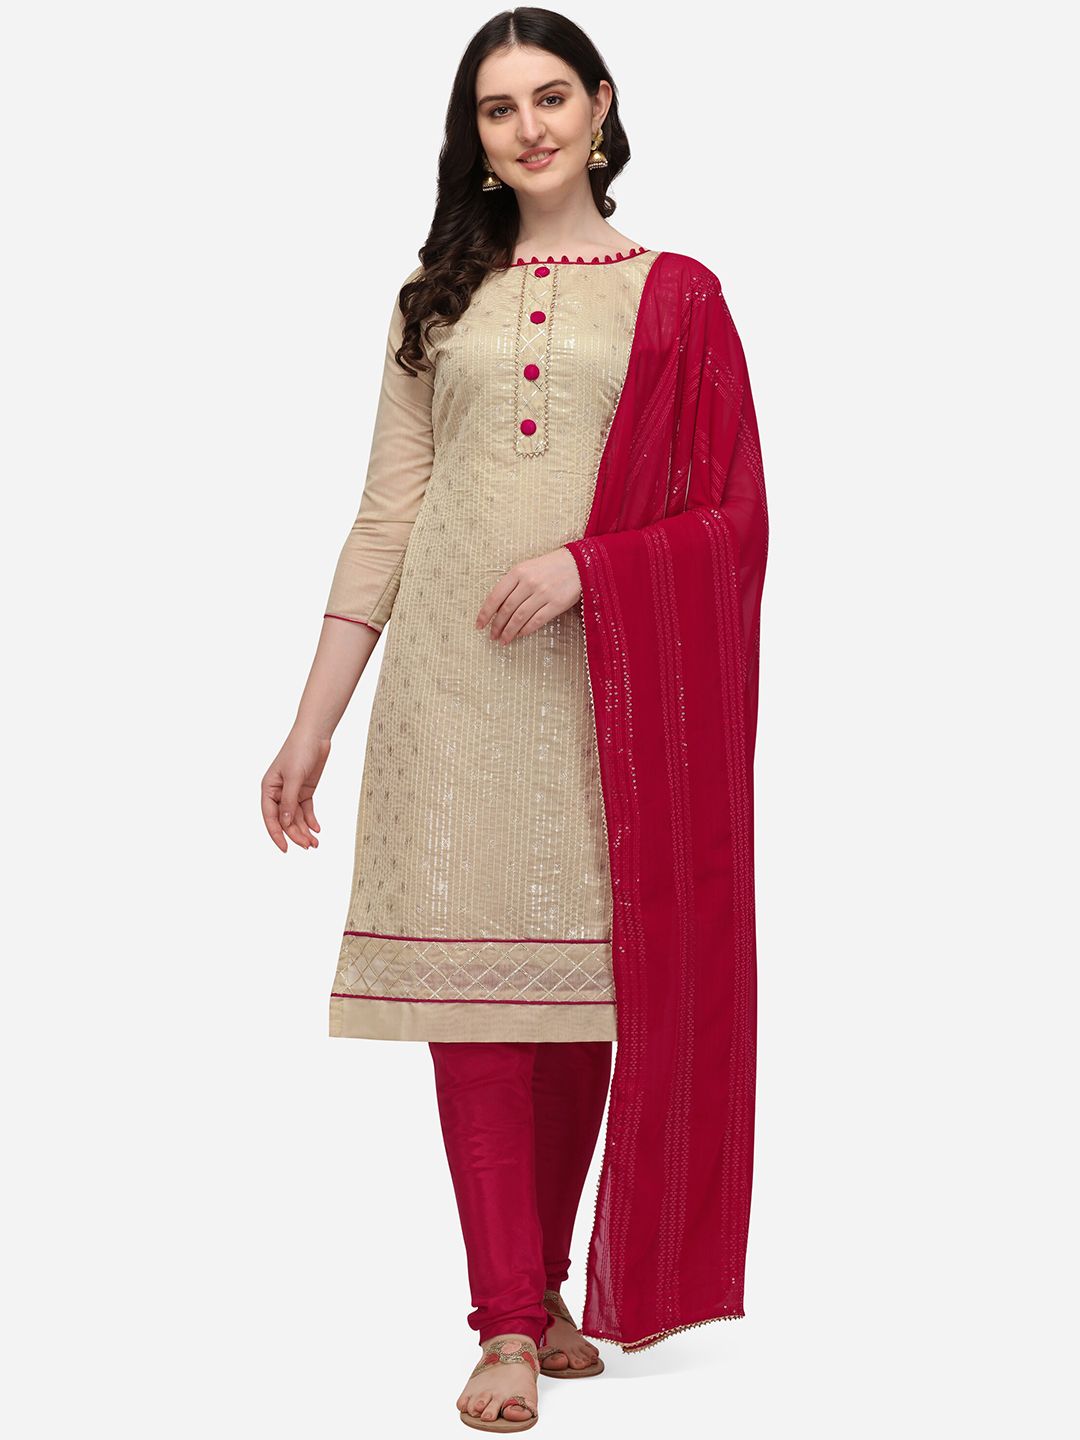 Mitera Cream-Coloured & Maroon Embroidered Unstitched Dress Material Price in India